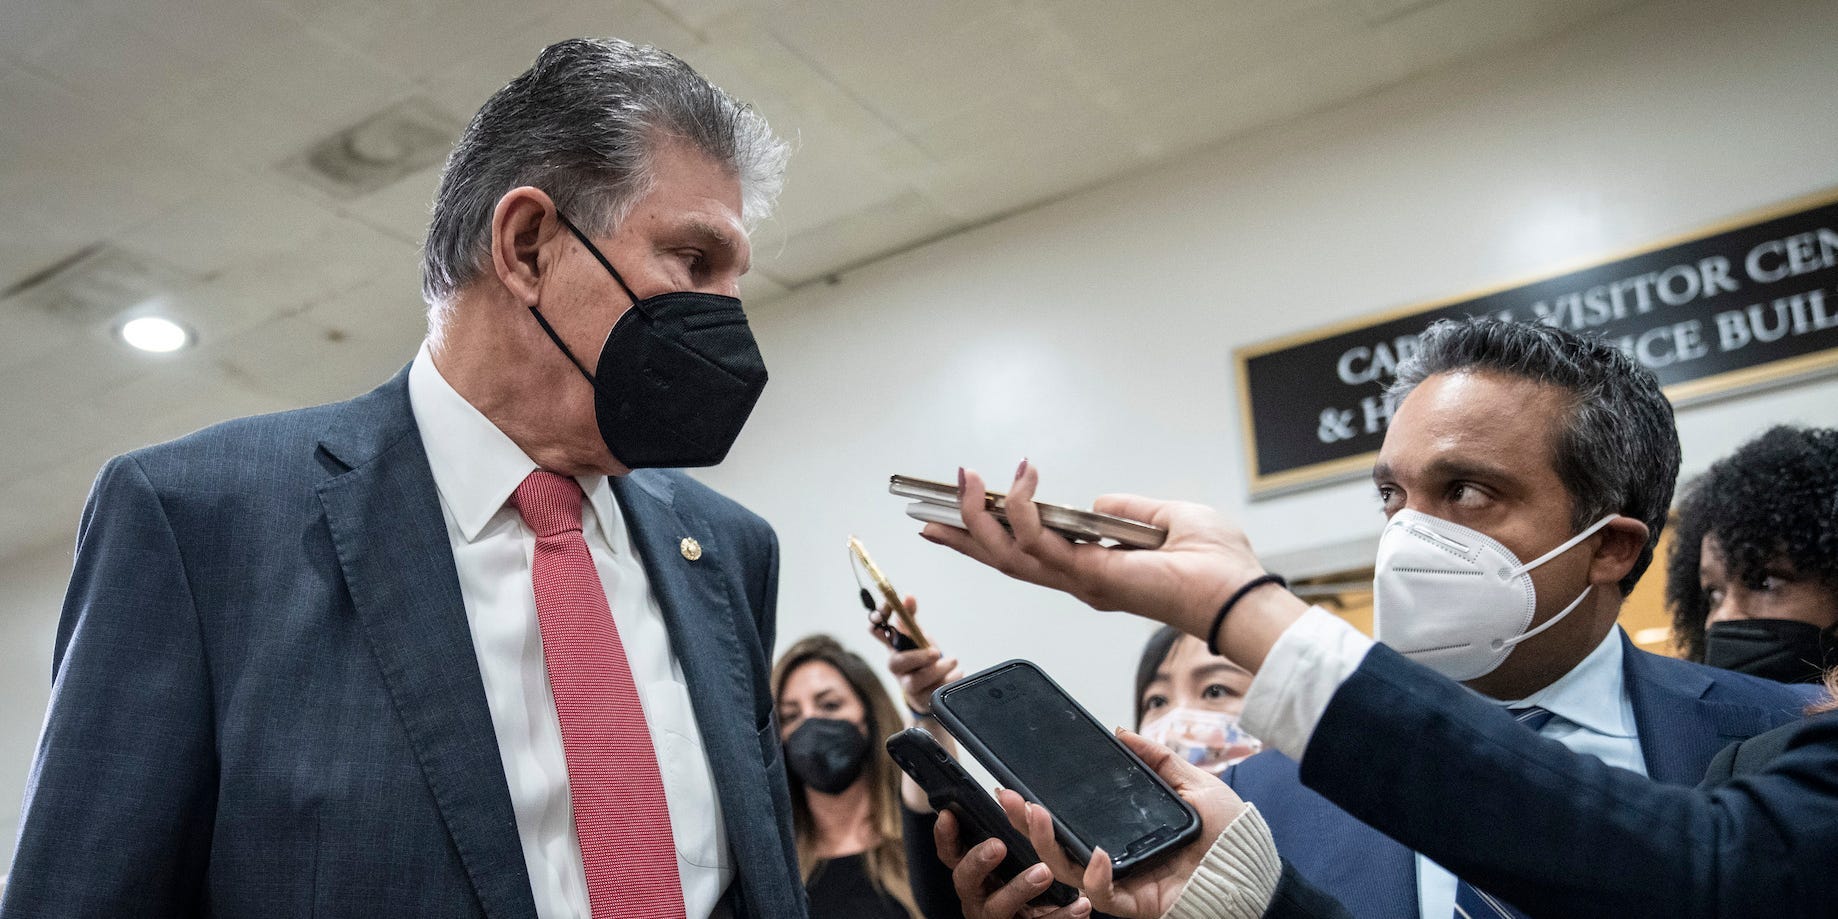 Sen. Joe Manchin (D-WV) speaks to reporters after a closed door briefing with Senators at the U.S. Capitol Building February 03, 2022 in Washington, DC.